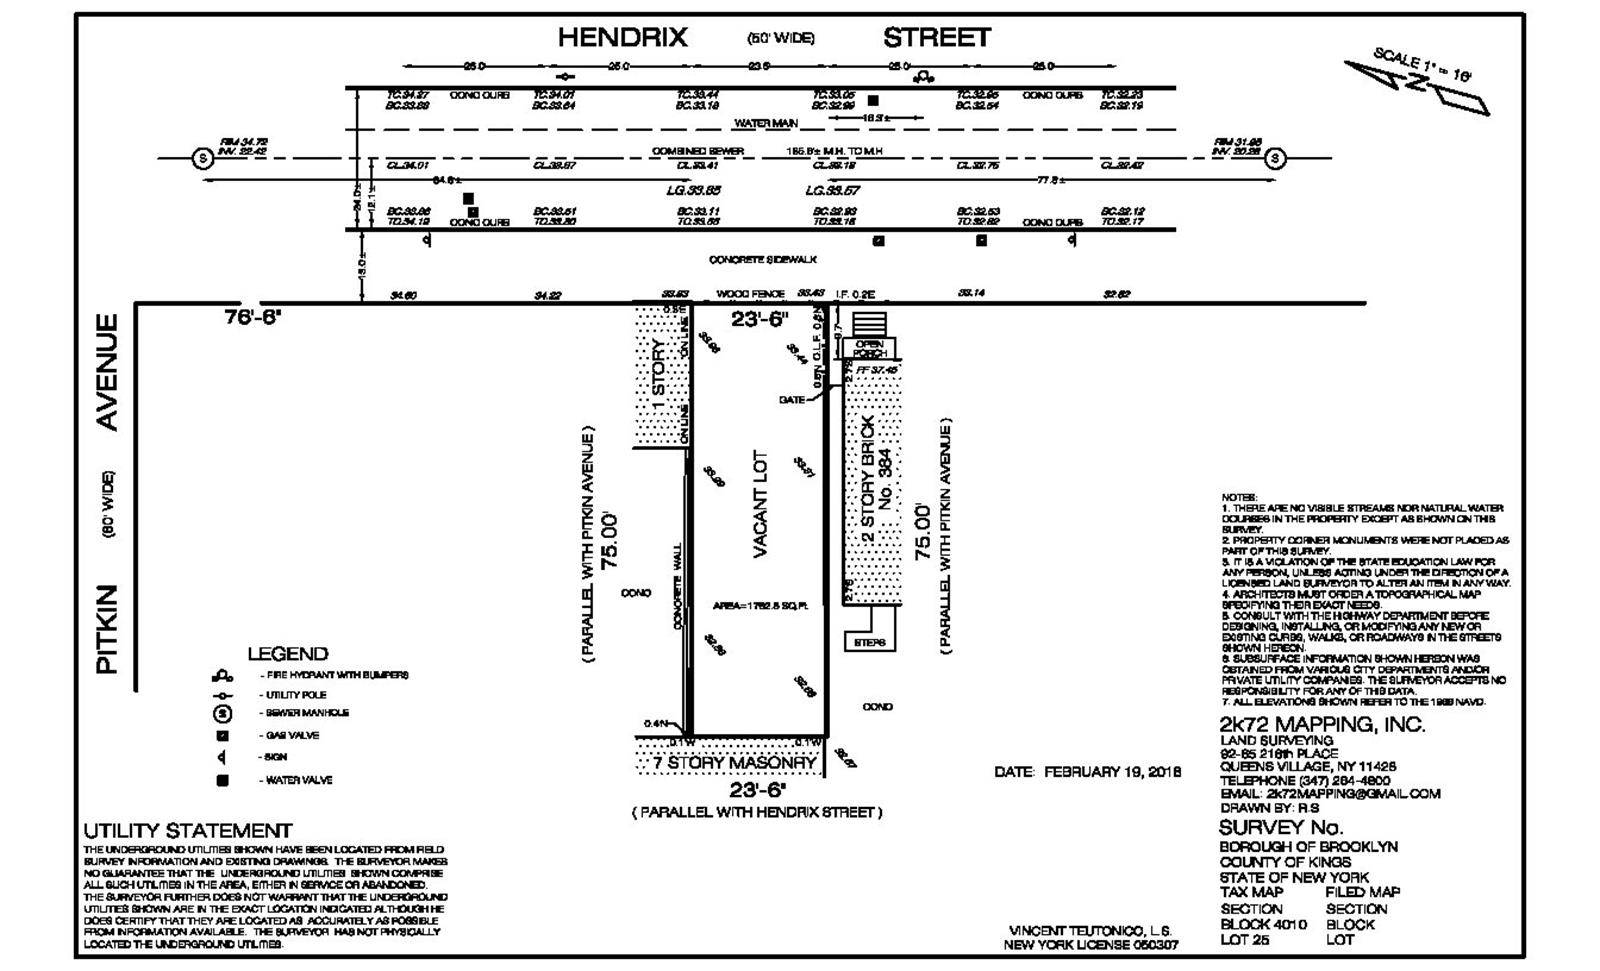 382 Hendrix St is located in NYC zone R7A with commercial overlay of C2 4.